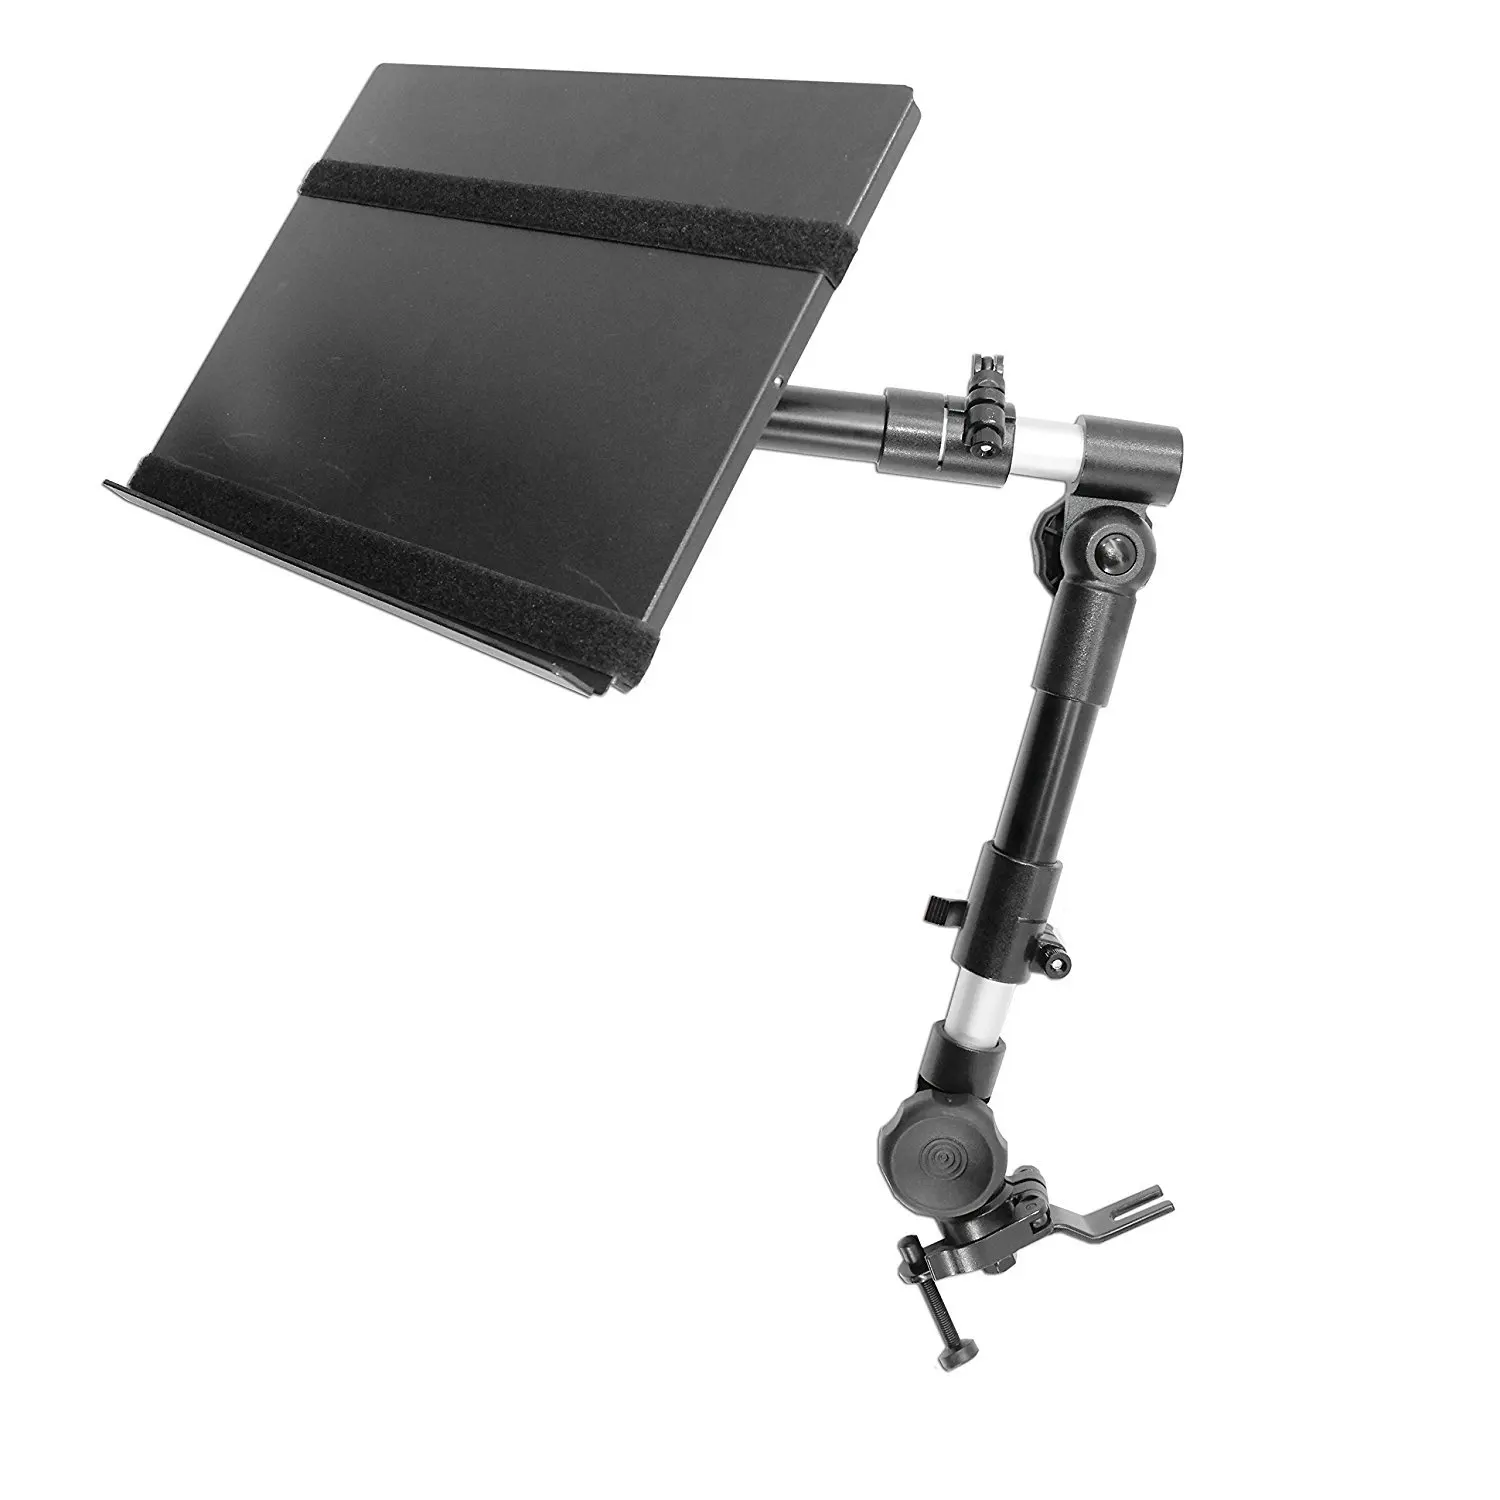 Cheap Rack Mount Laptop Stand, find Rack Mount Laptop Stand deals on